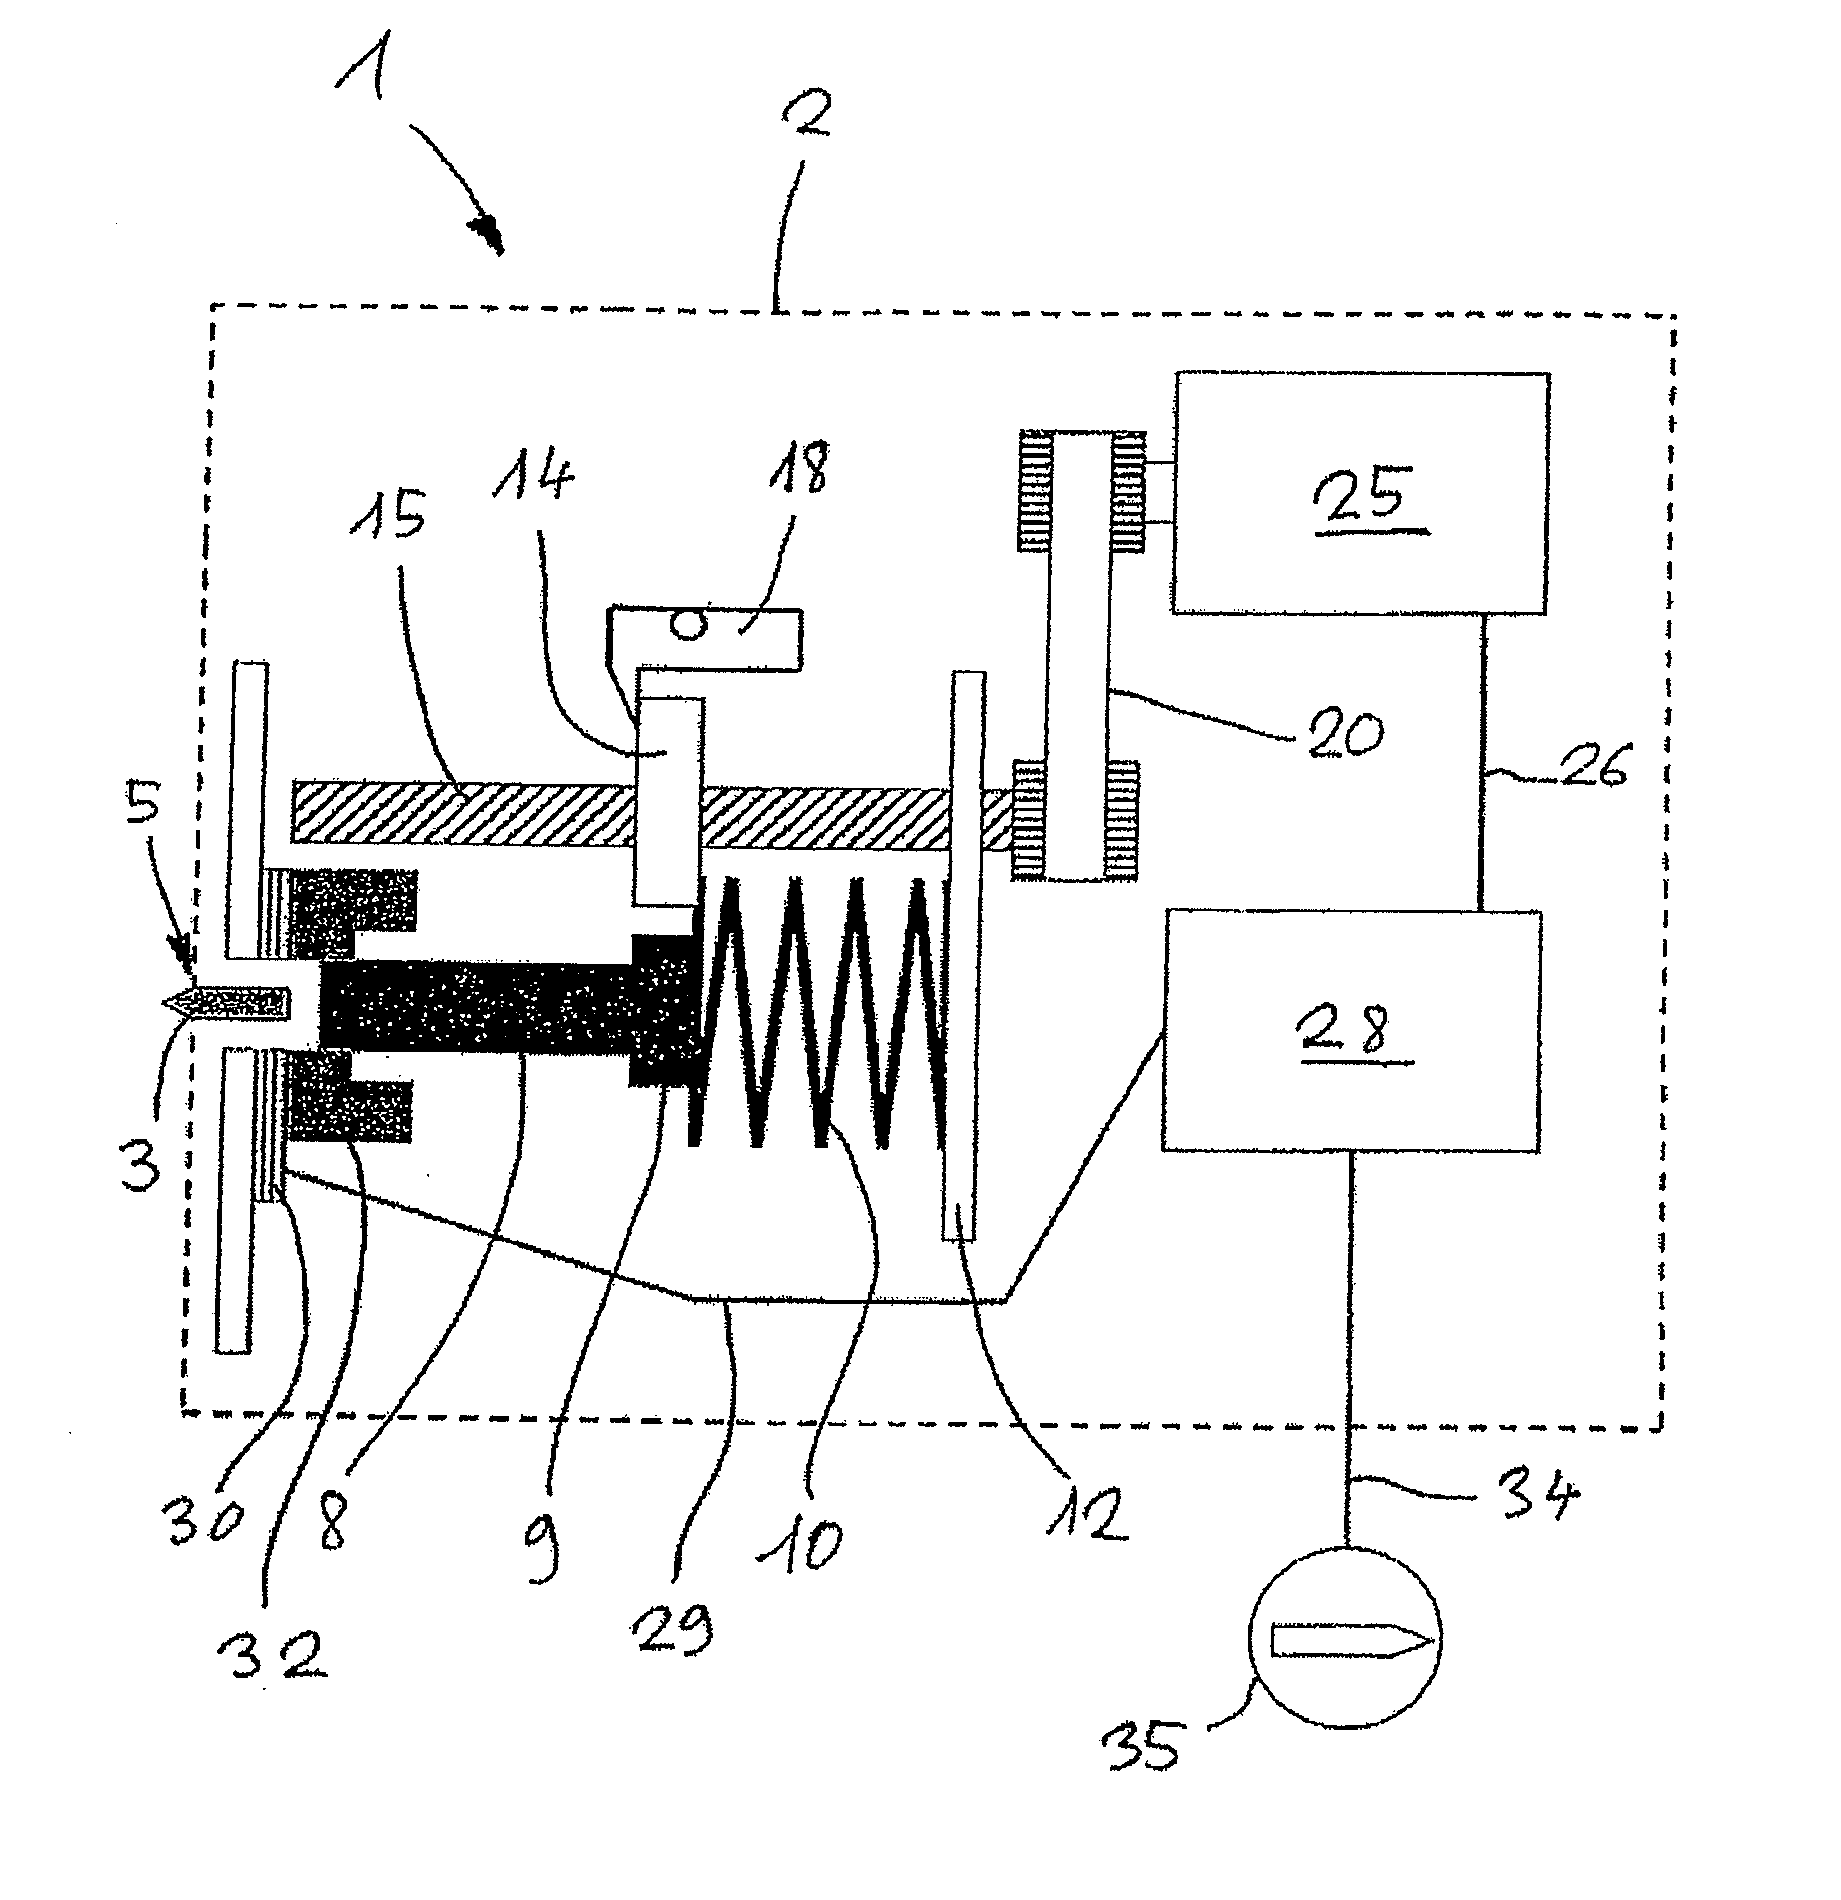 Electrically powered bolt setting device